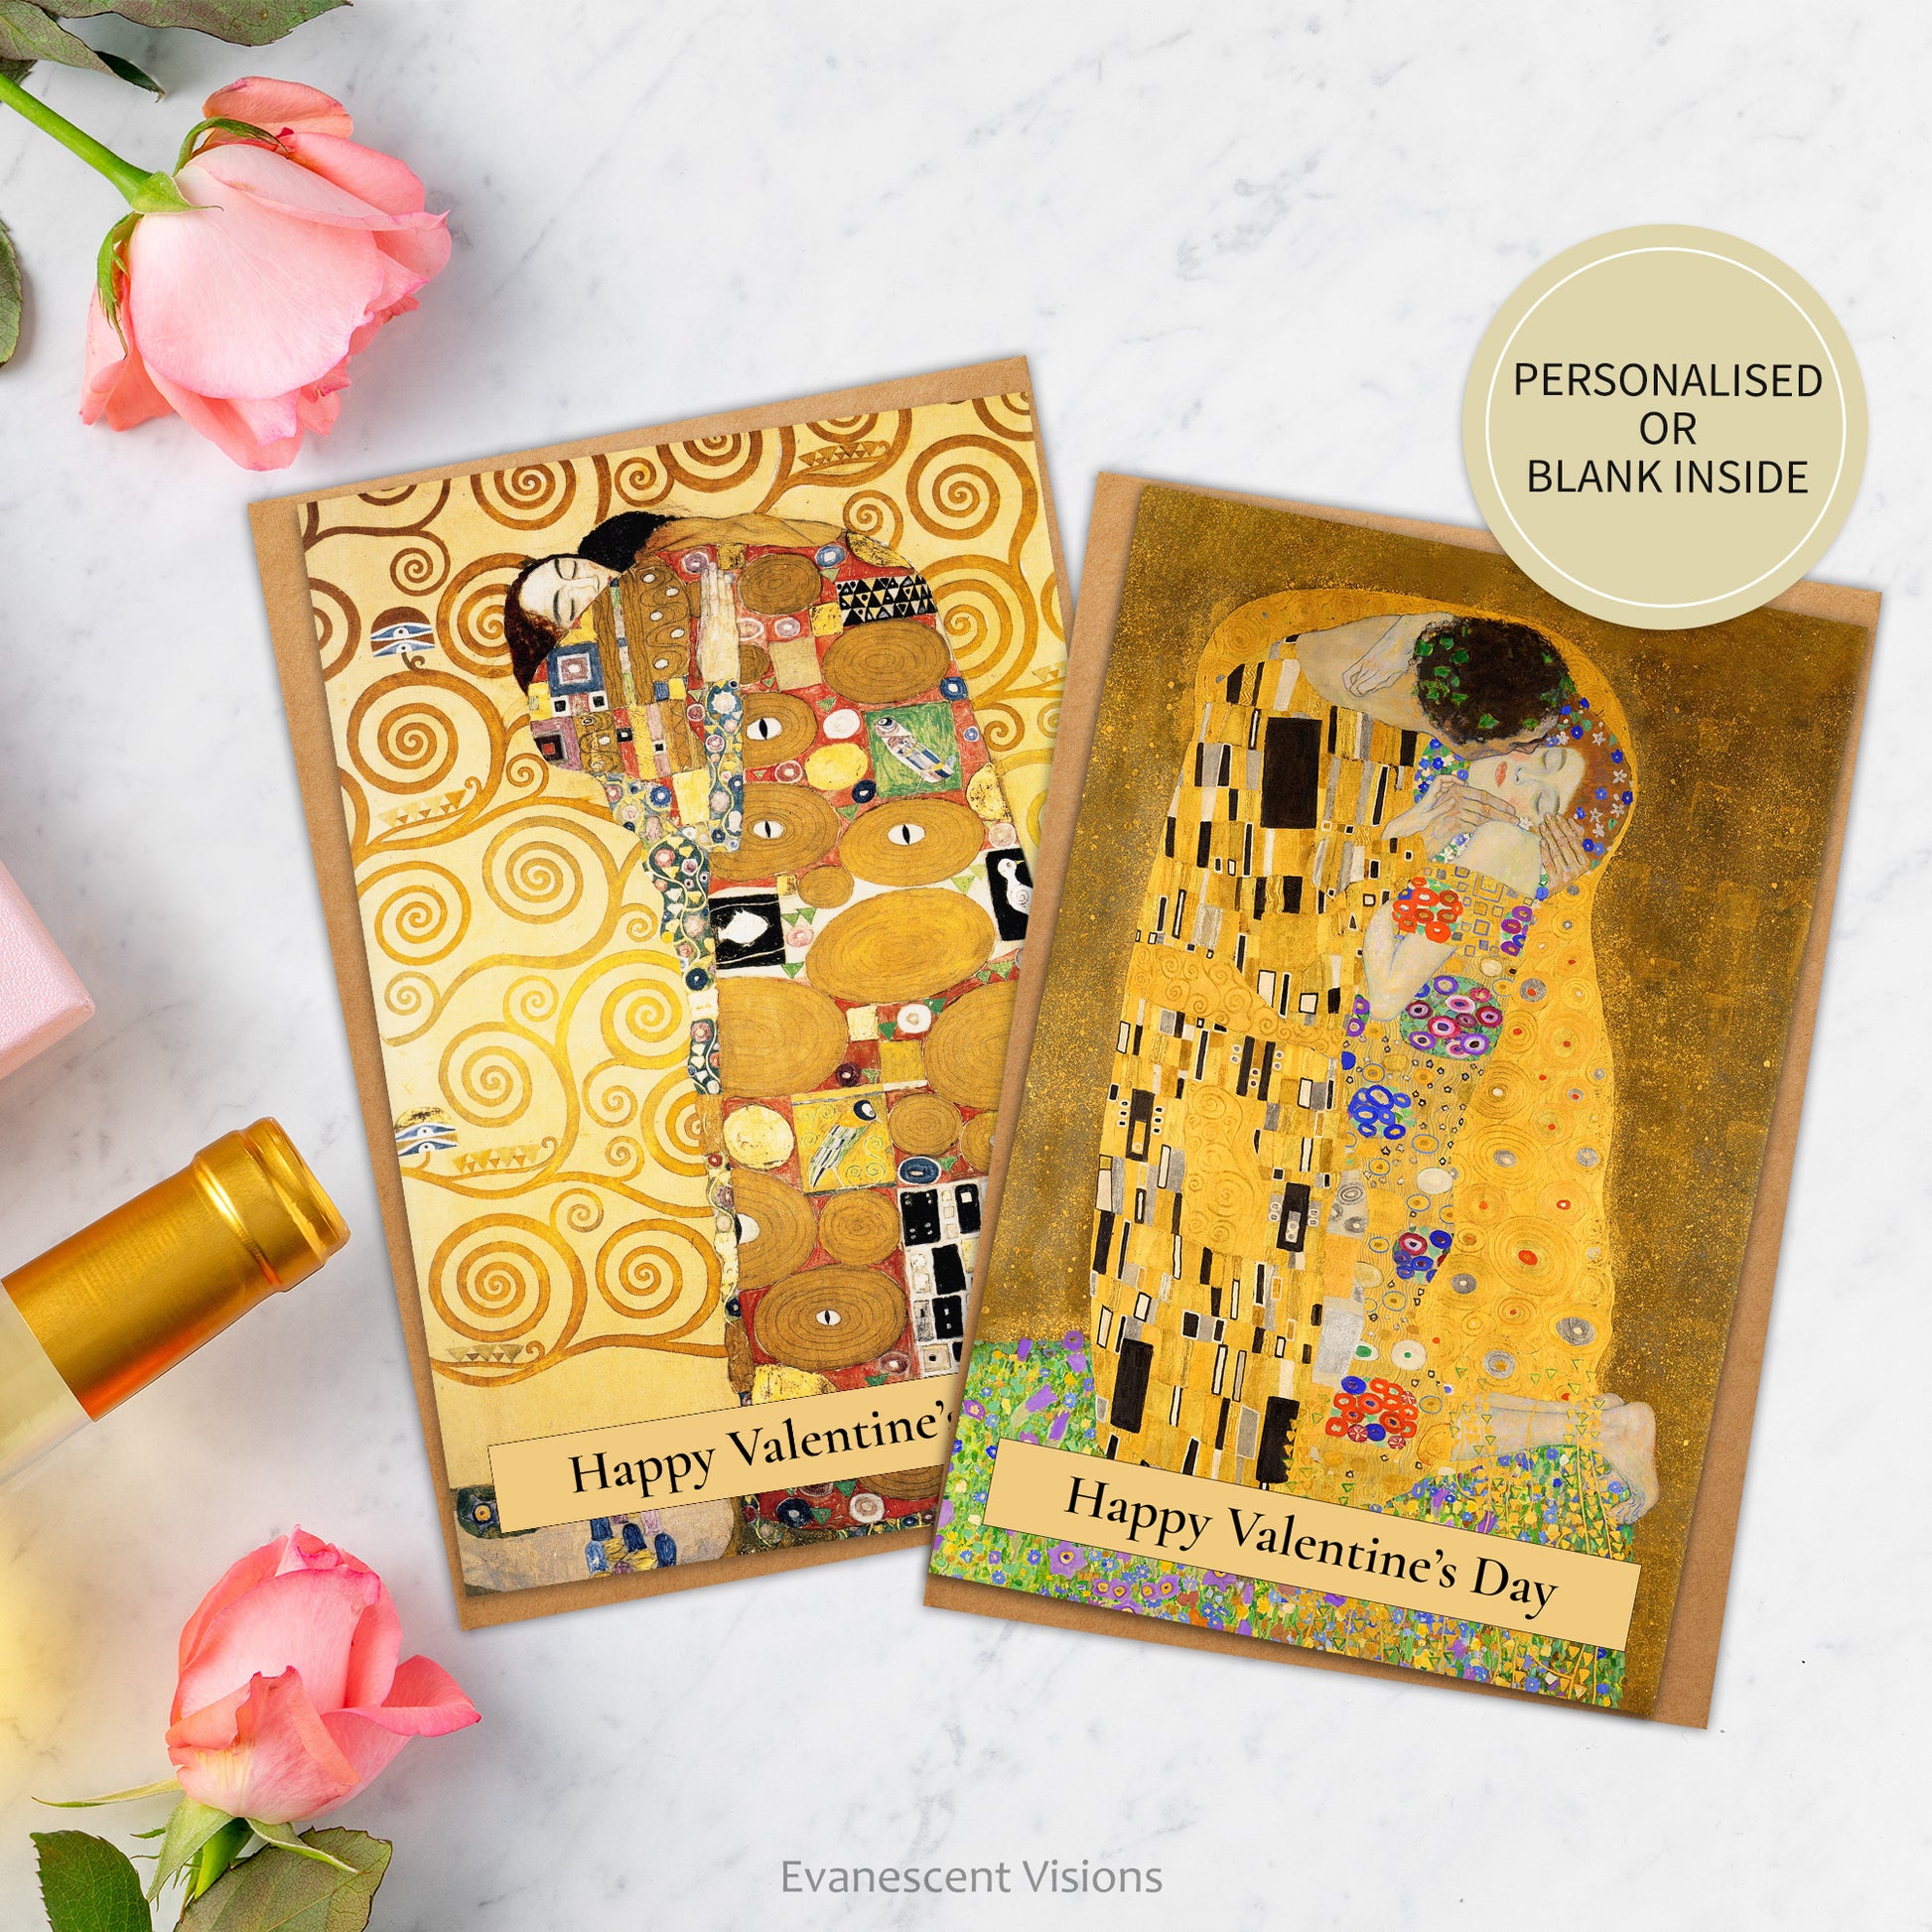 Personalised Valentine Cards with paintings 'The Kiss' or 'Fulfilment (the Embrace)' by Gustav Klimt  laying on a marble table with roses